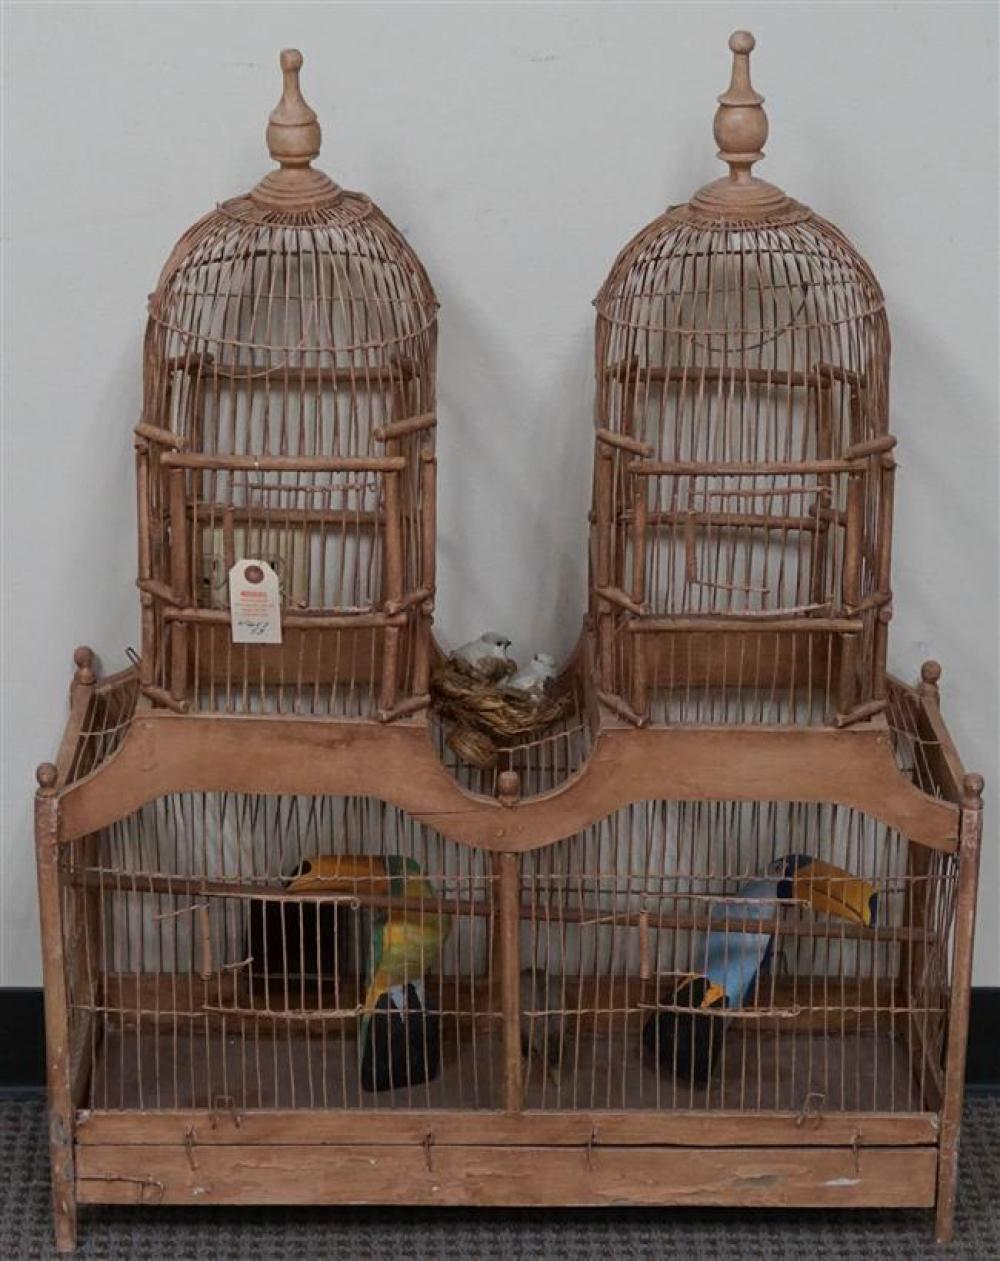 DECORATED WOOD AND METAL BIRD CAGE,